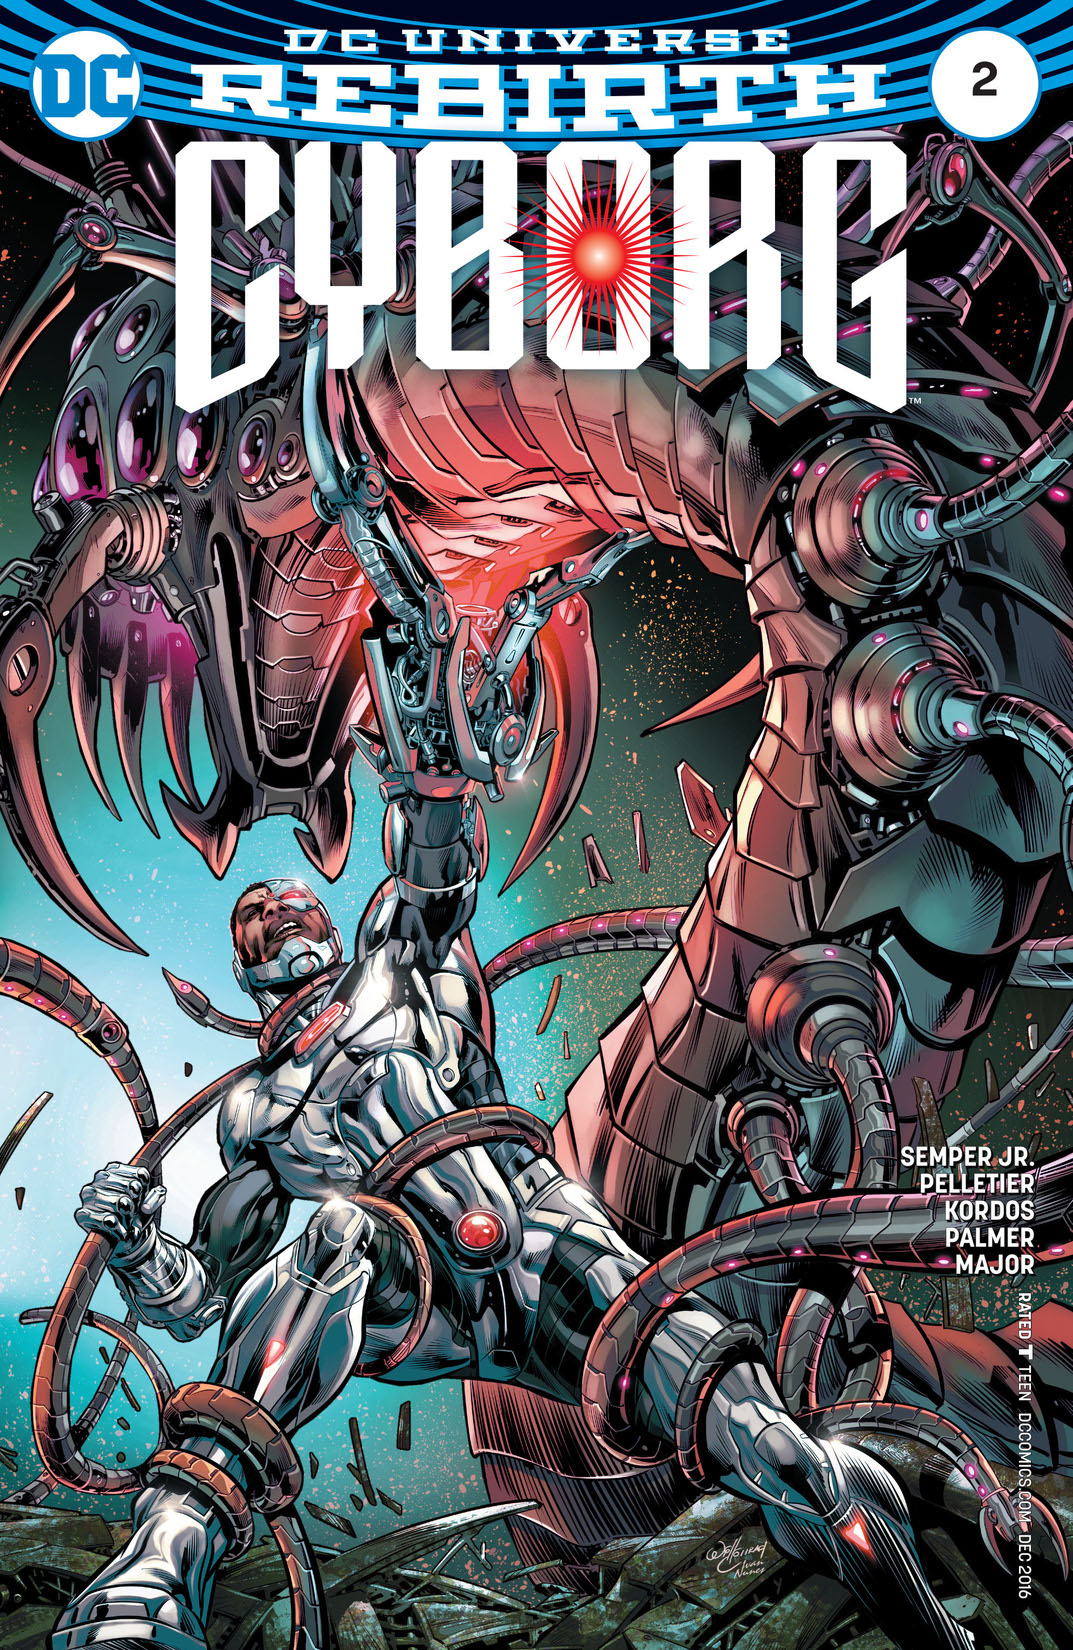 Cyborg (2016-) #2 preview images